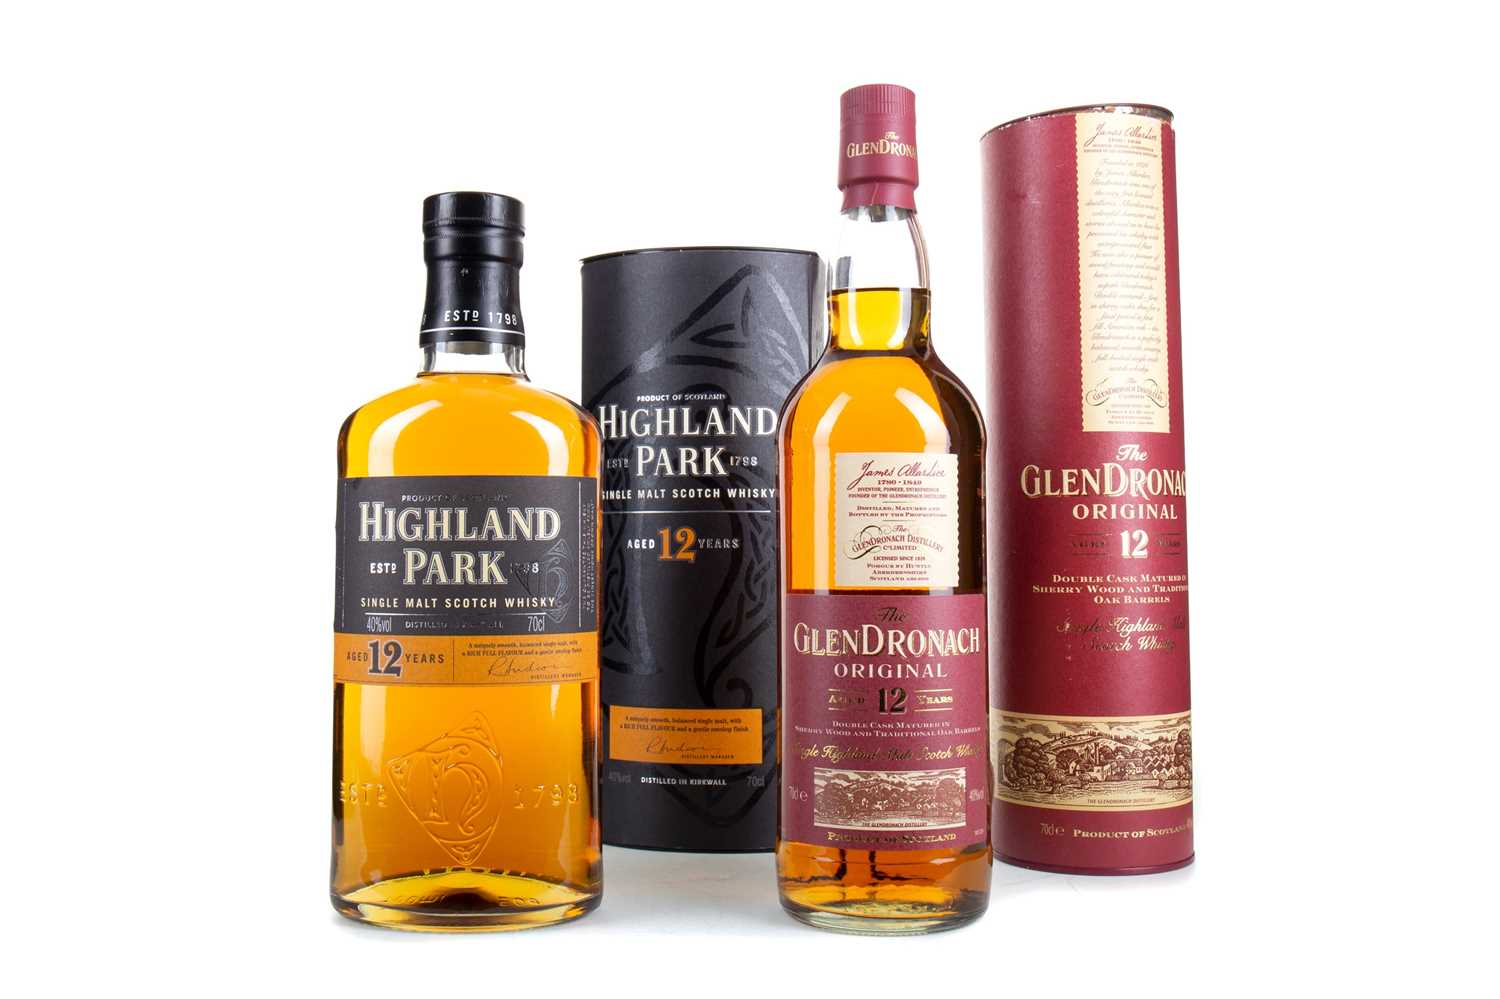 Lot 76 - GLENDRONACH 12 YEAR OLD ORIGINAL AND HIGHLAND PARK 12 YEAR OLD